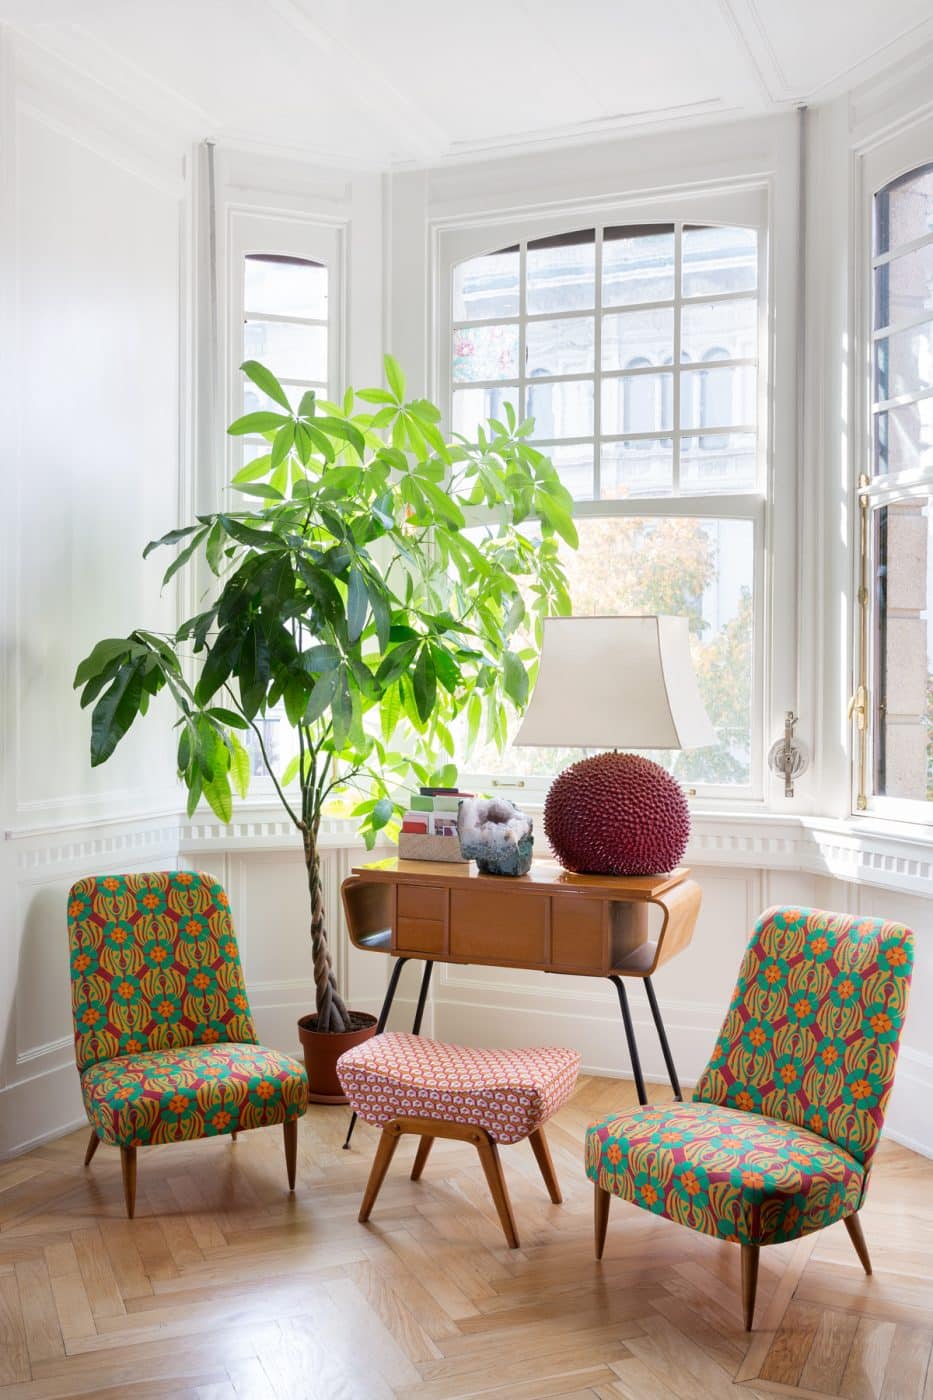 Seating area featuring vintage furniture reupholstered in La DoubleJ Cubi prints: A pair of 1950s CHAIRS flank a 1970s POGGIAPIEDI, or footstool.